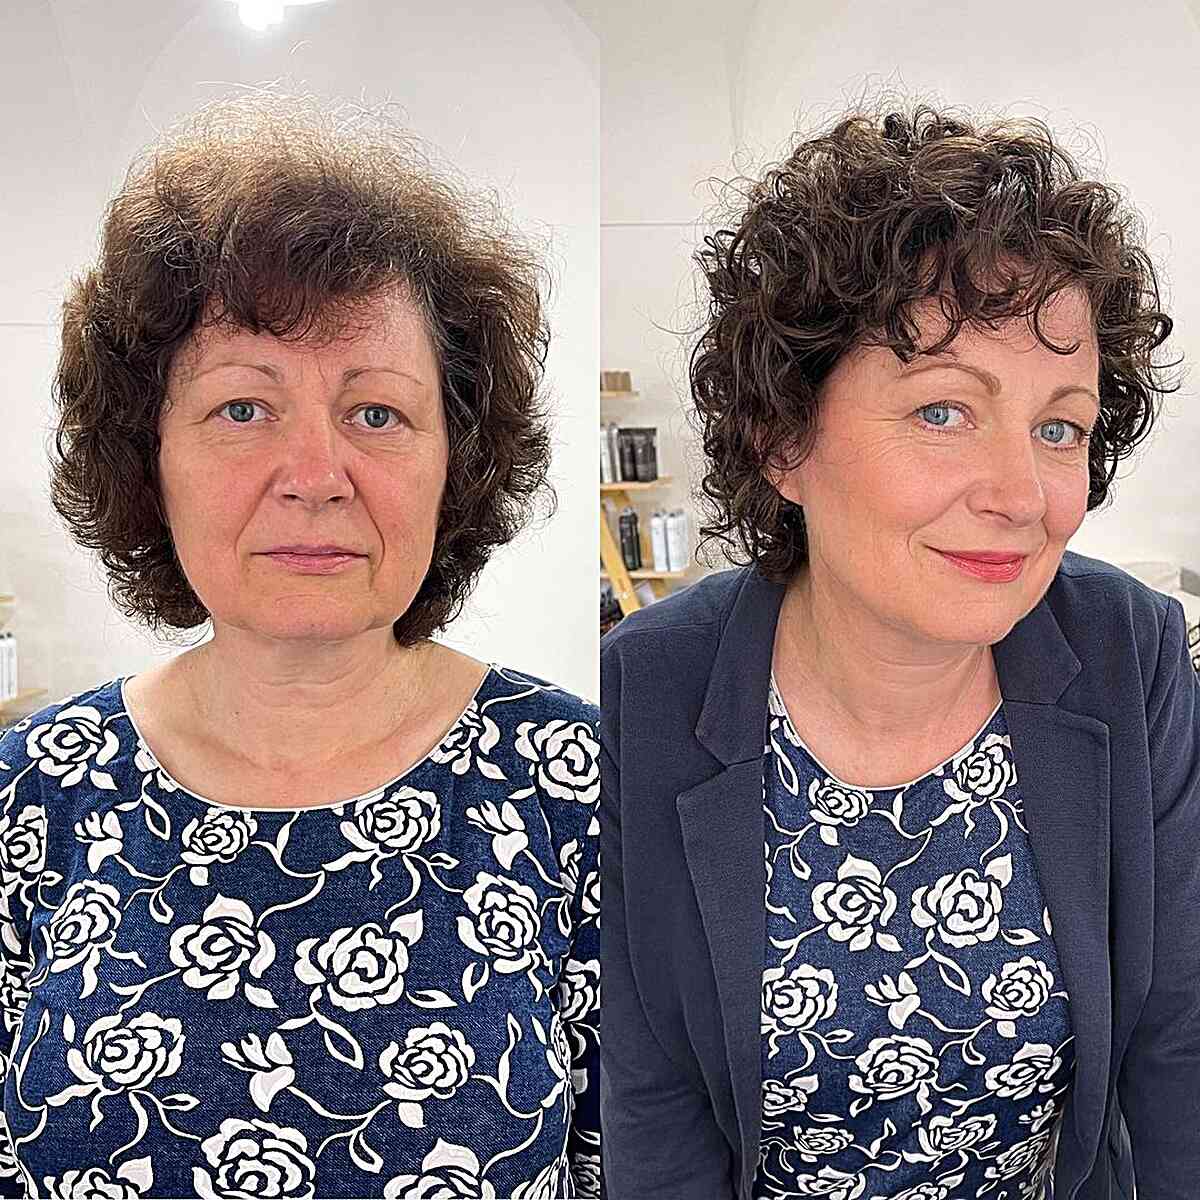 Wispy Curly Fringe on a Curly Bob Hairstyle for Women Aged 50